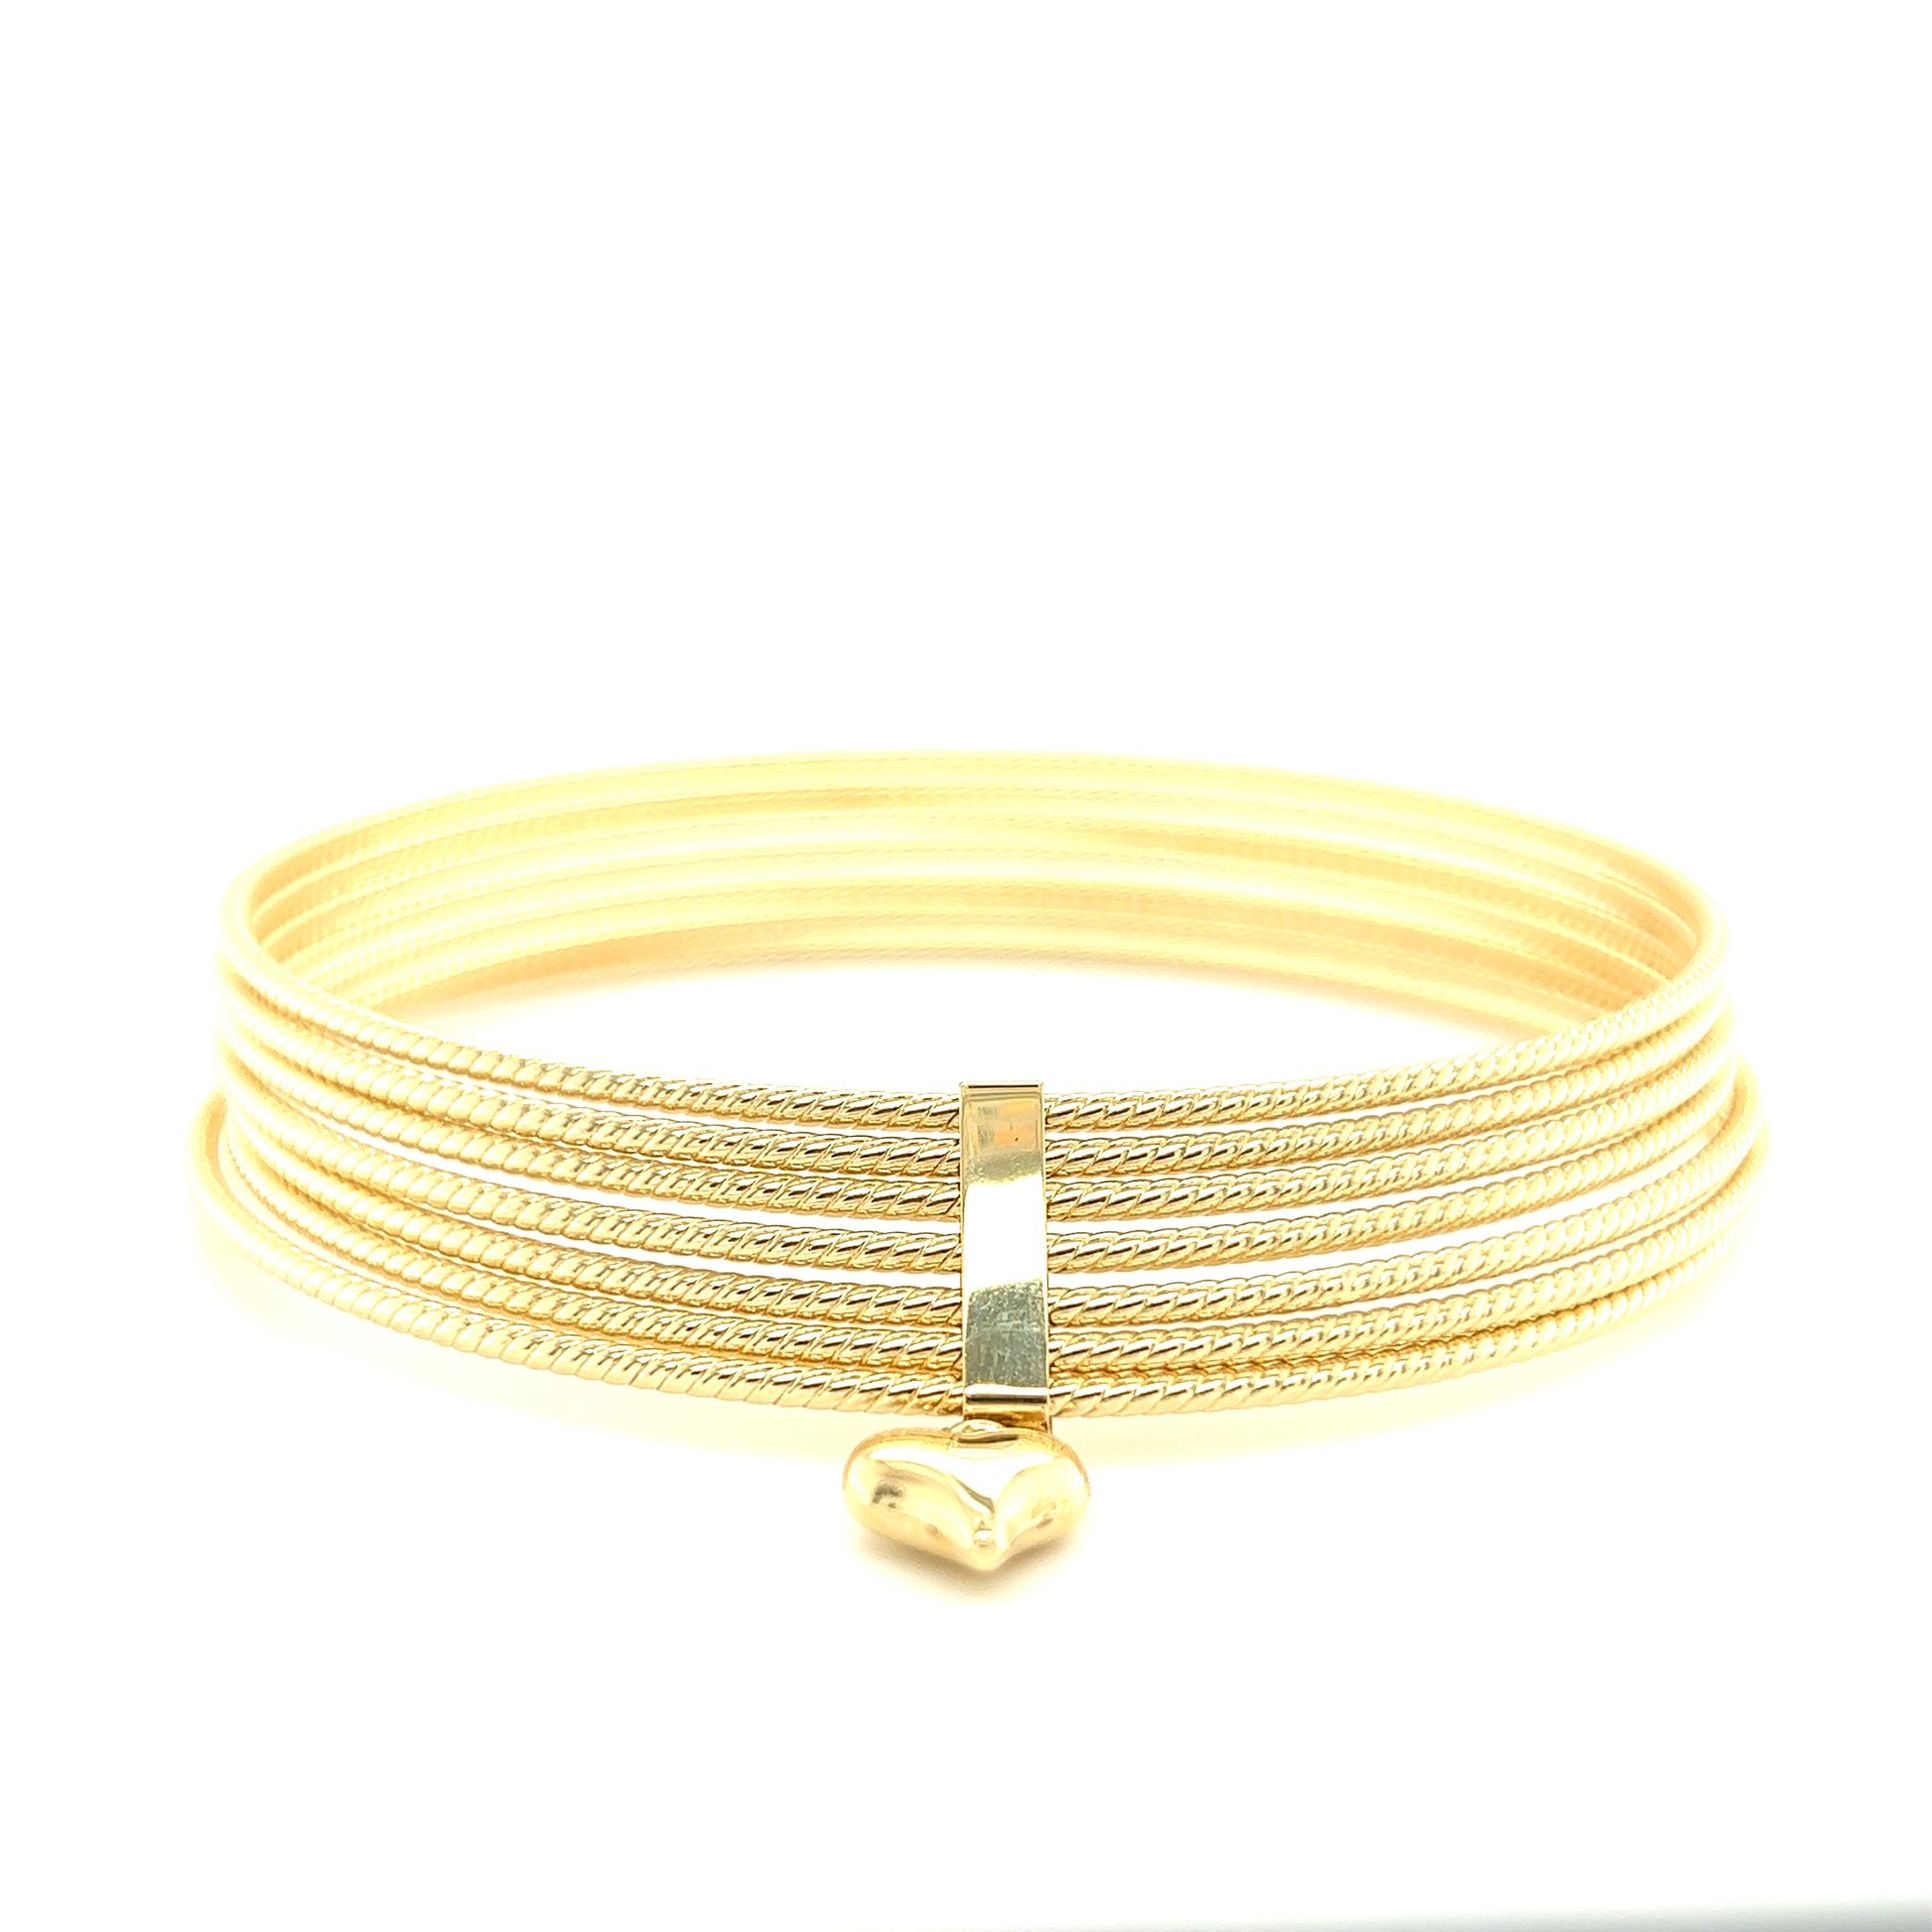 Textured Bangle Bracelet Set with Dangle Heart in 14K Yellow Gold Gold Charm View